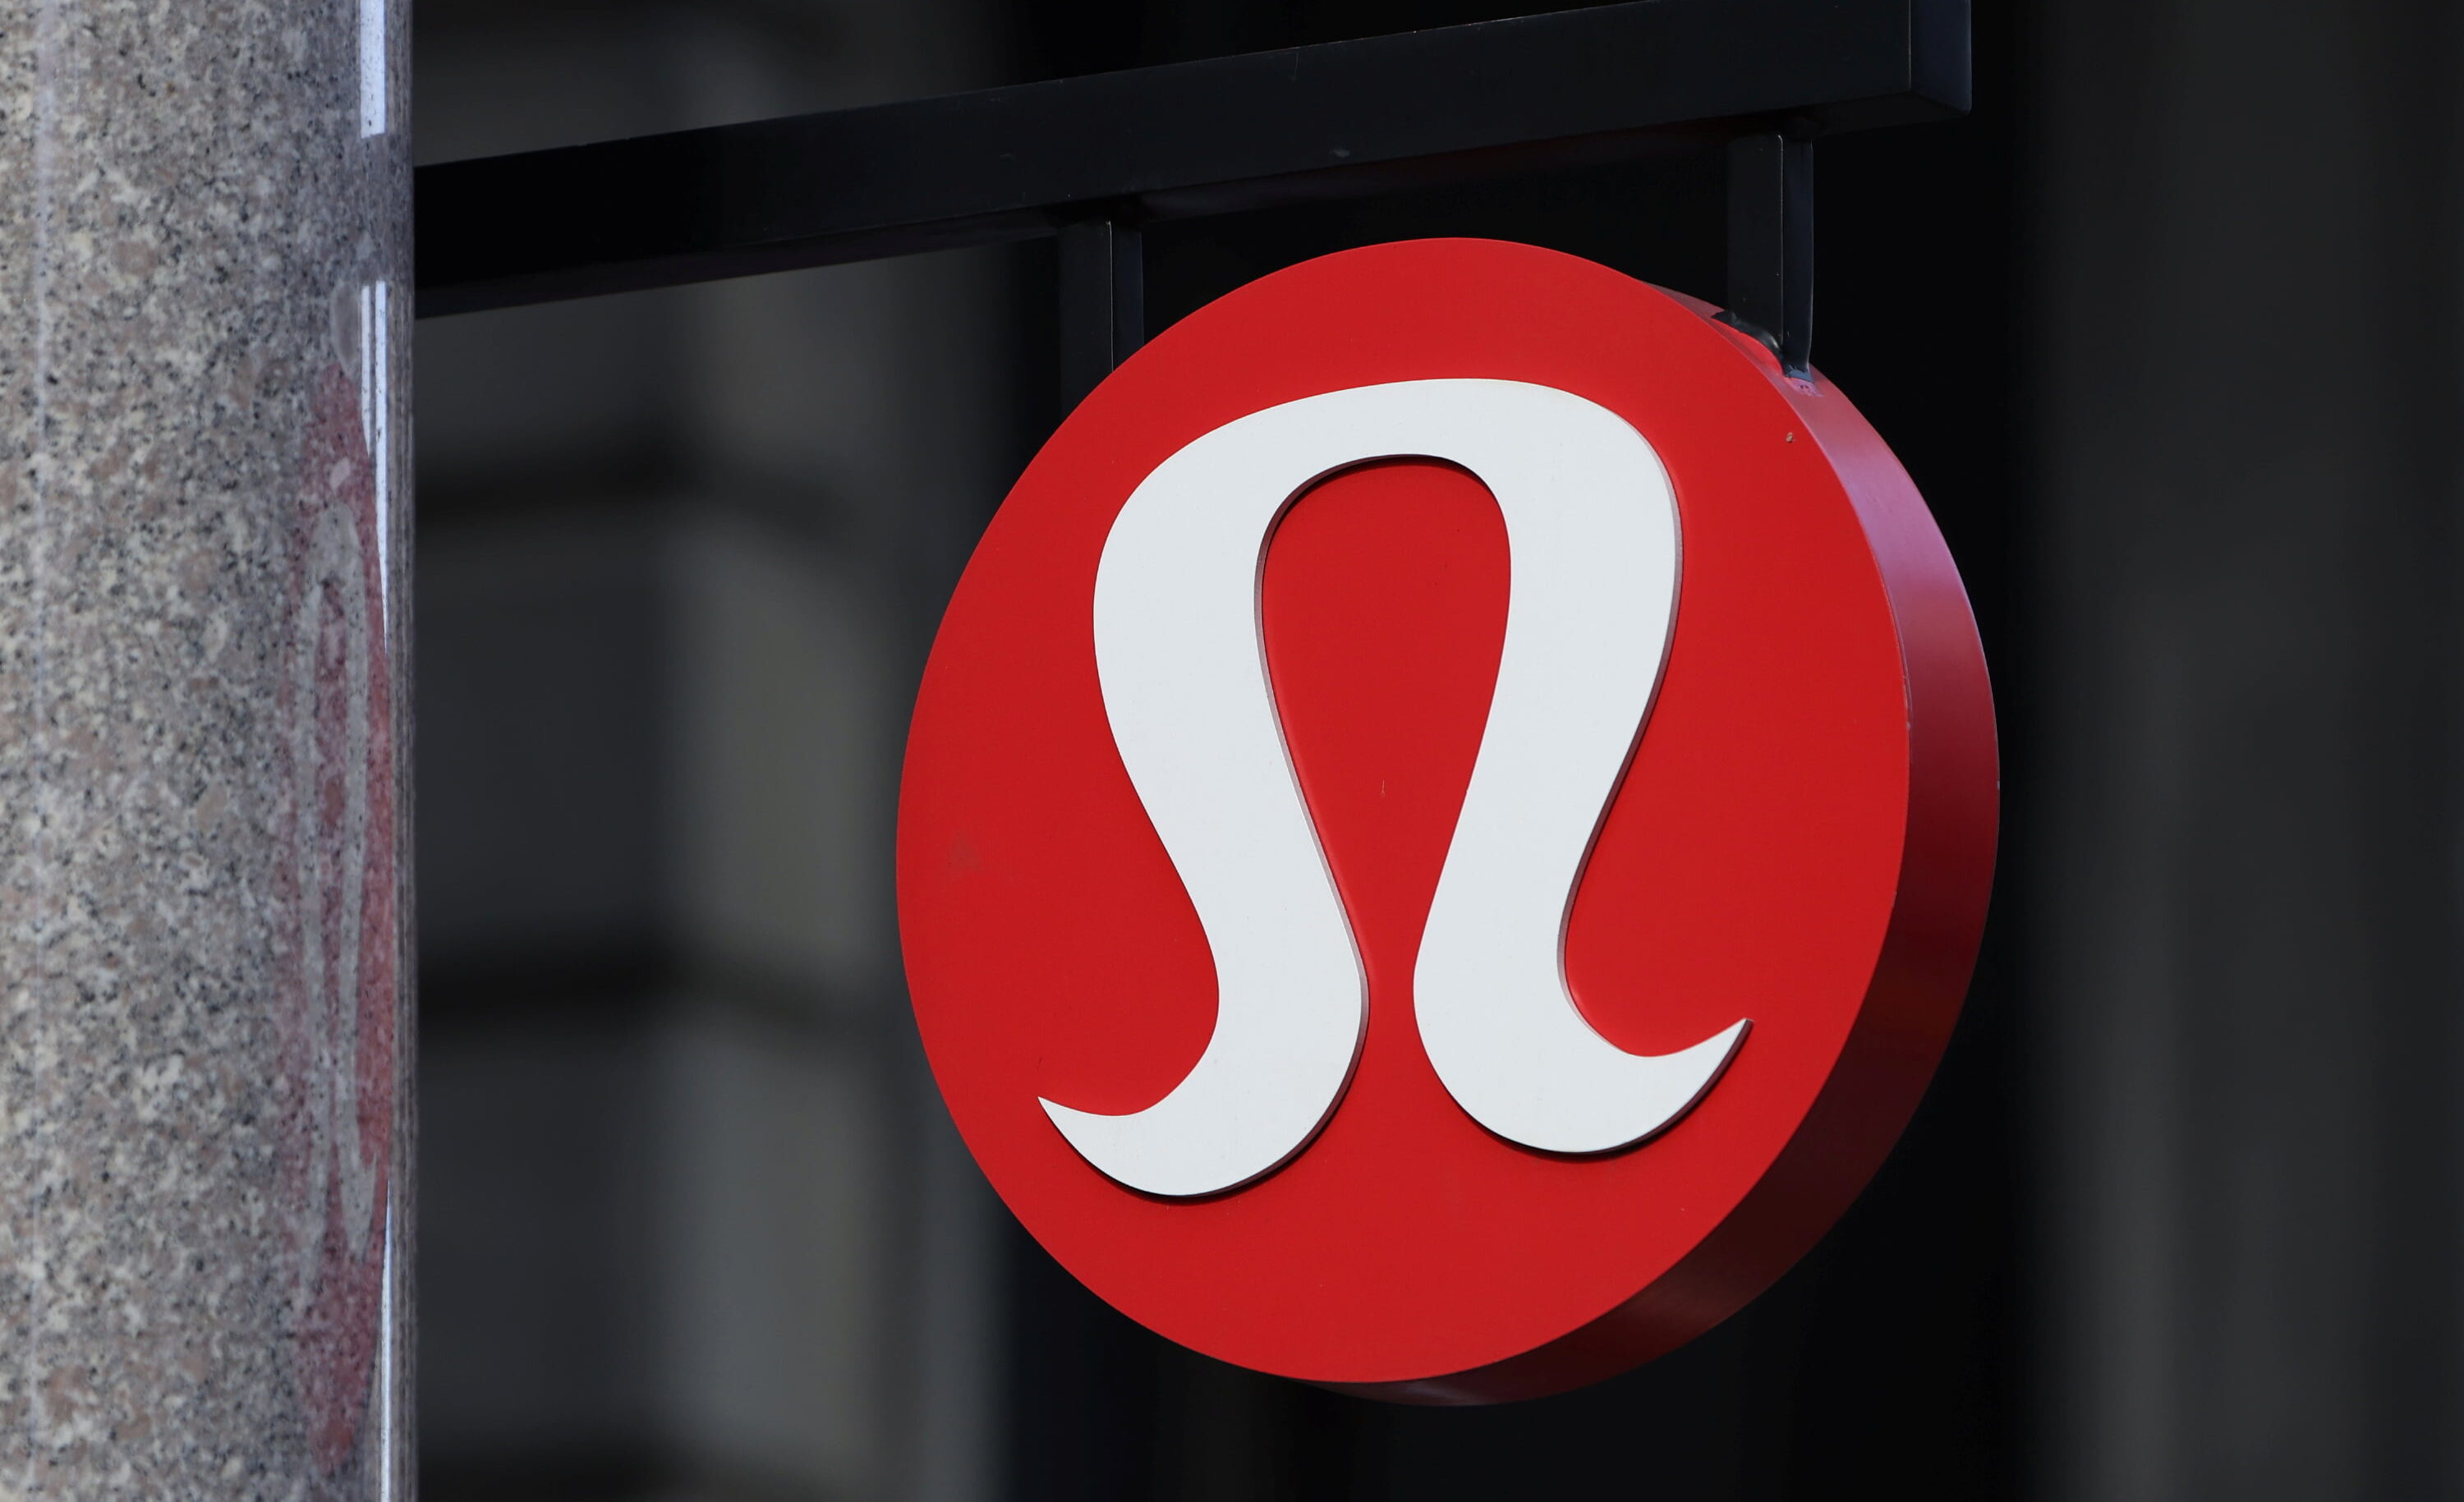 Lululemon Founder Blasts DEI, Says Company Putting 'Unhealthy People' in  Ads